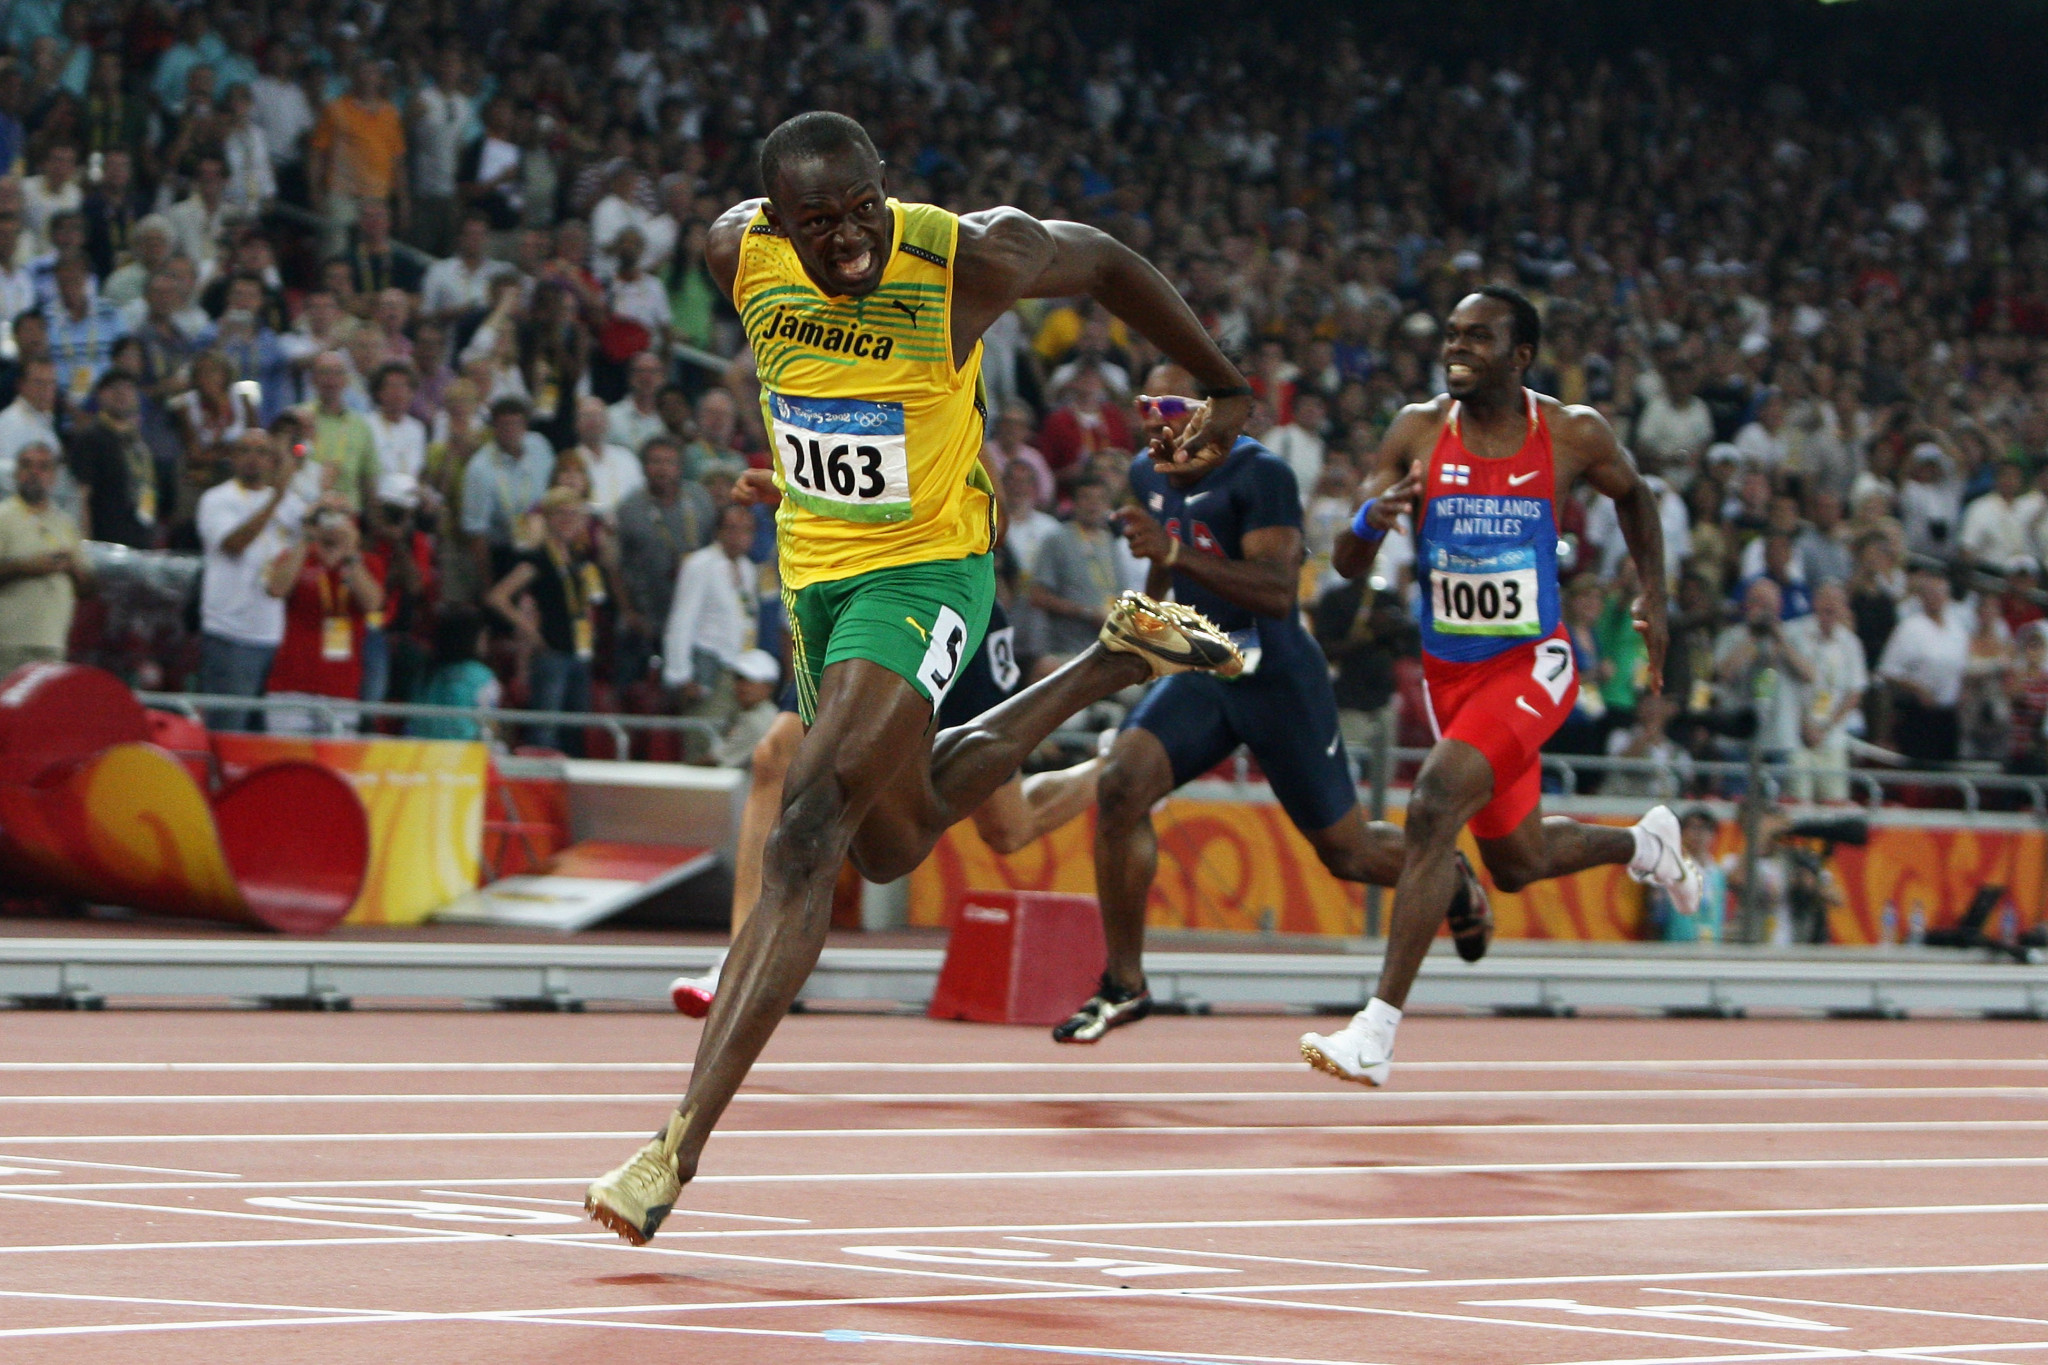 Usain Bolt wins the 200m at the Beijing Olympics in 2008, a high point in his career ©Getty Images